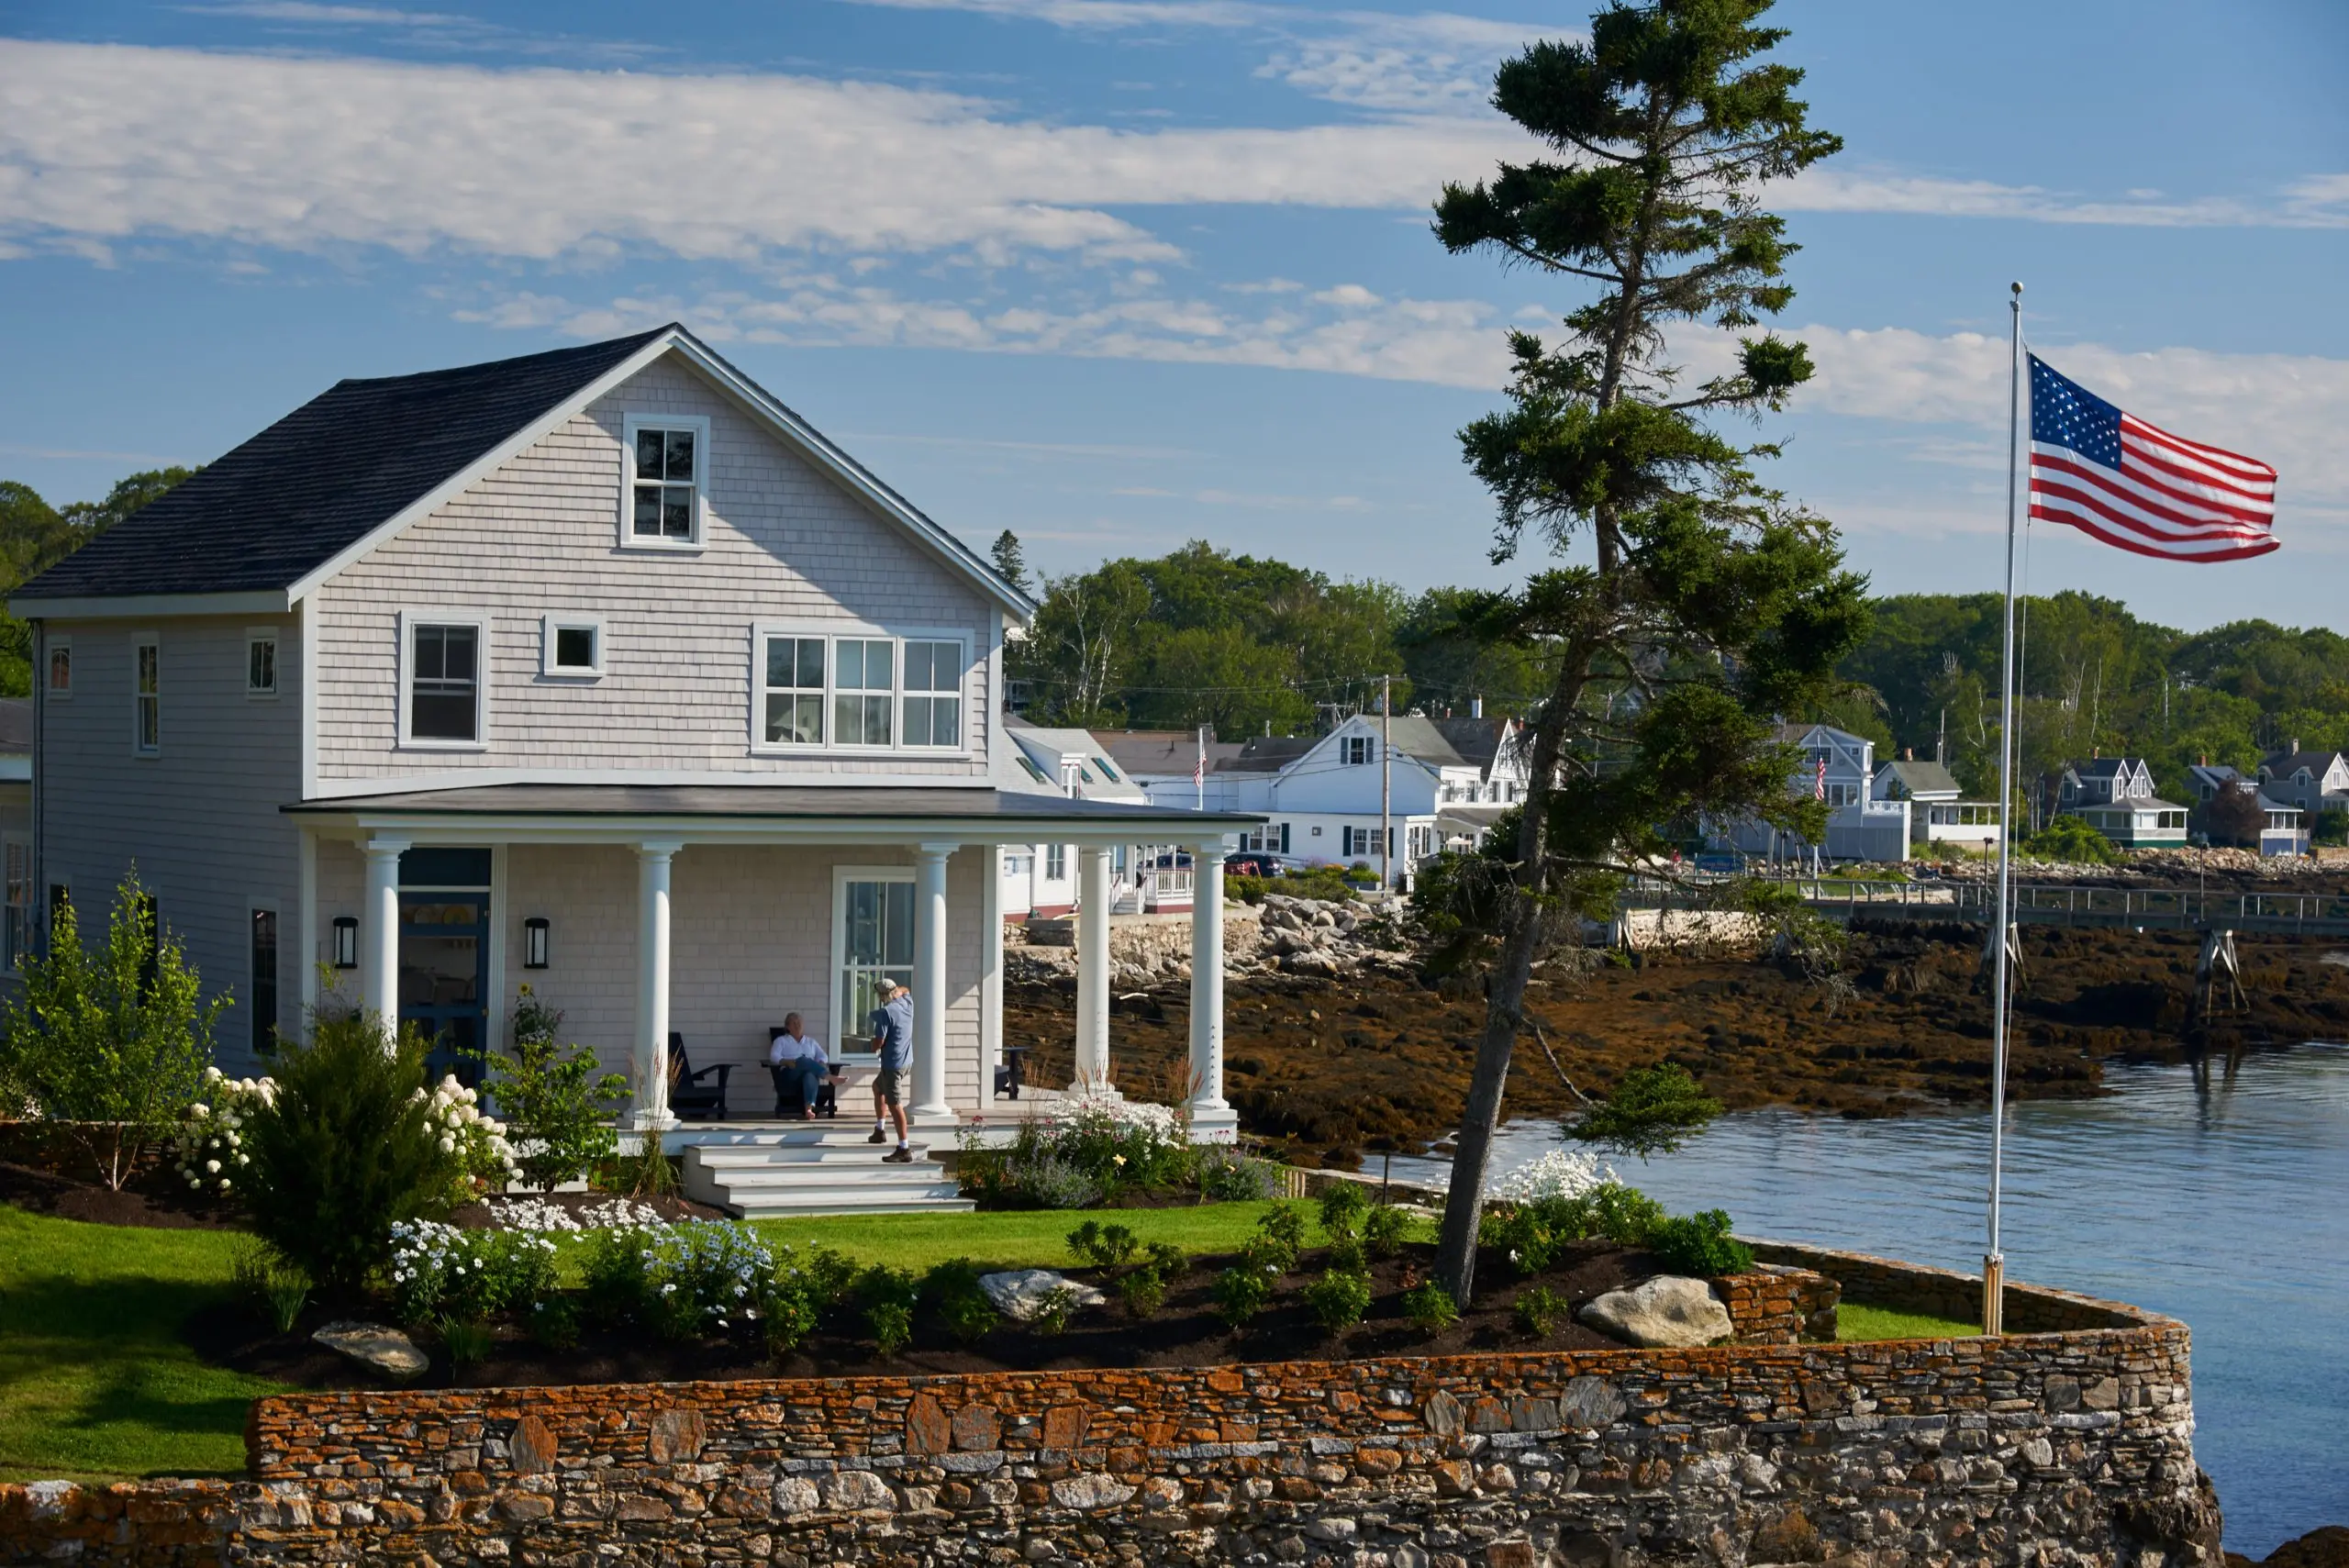 Welcoming view of coastal Maine home with flag, stone wall, classic pillars, a wrap porch, and beautiful floral accent along the ocean.